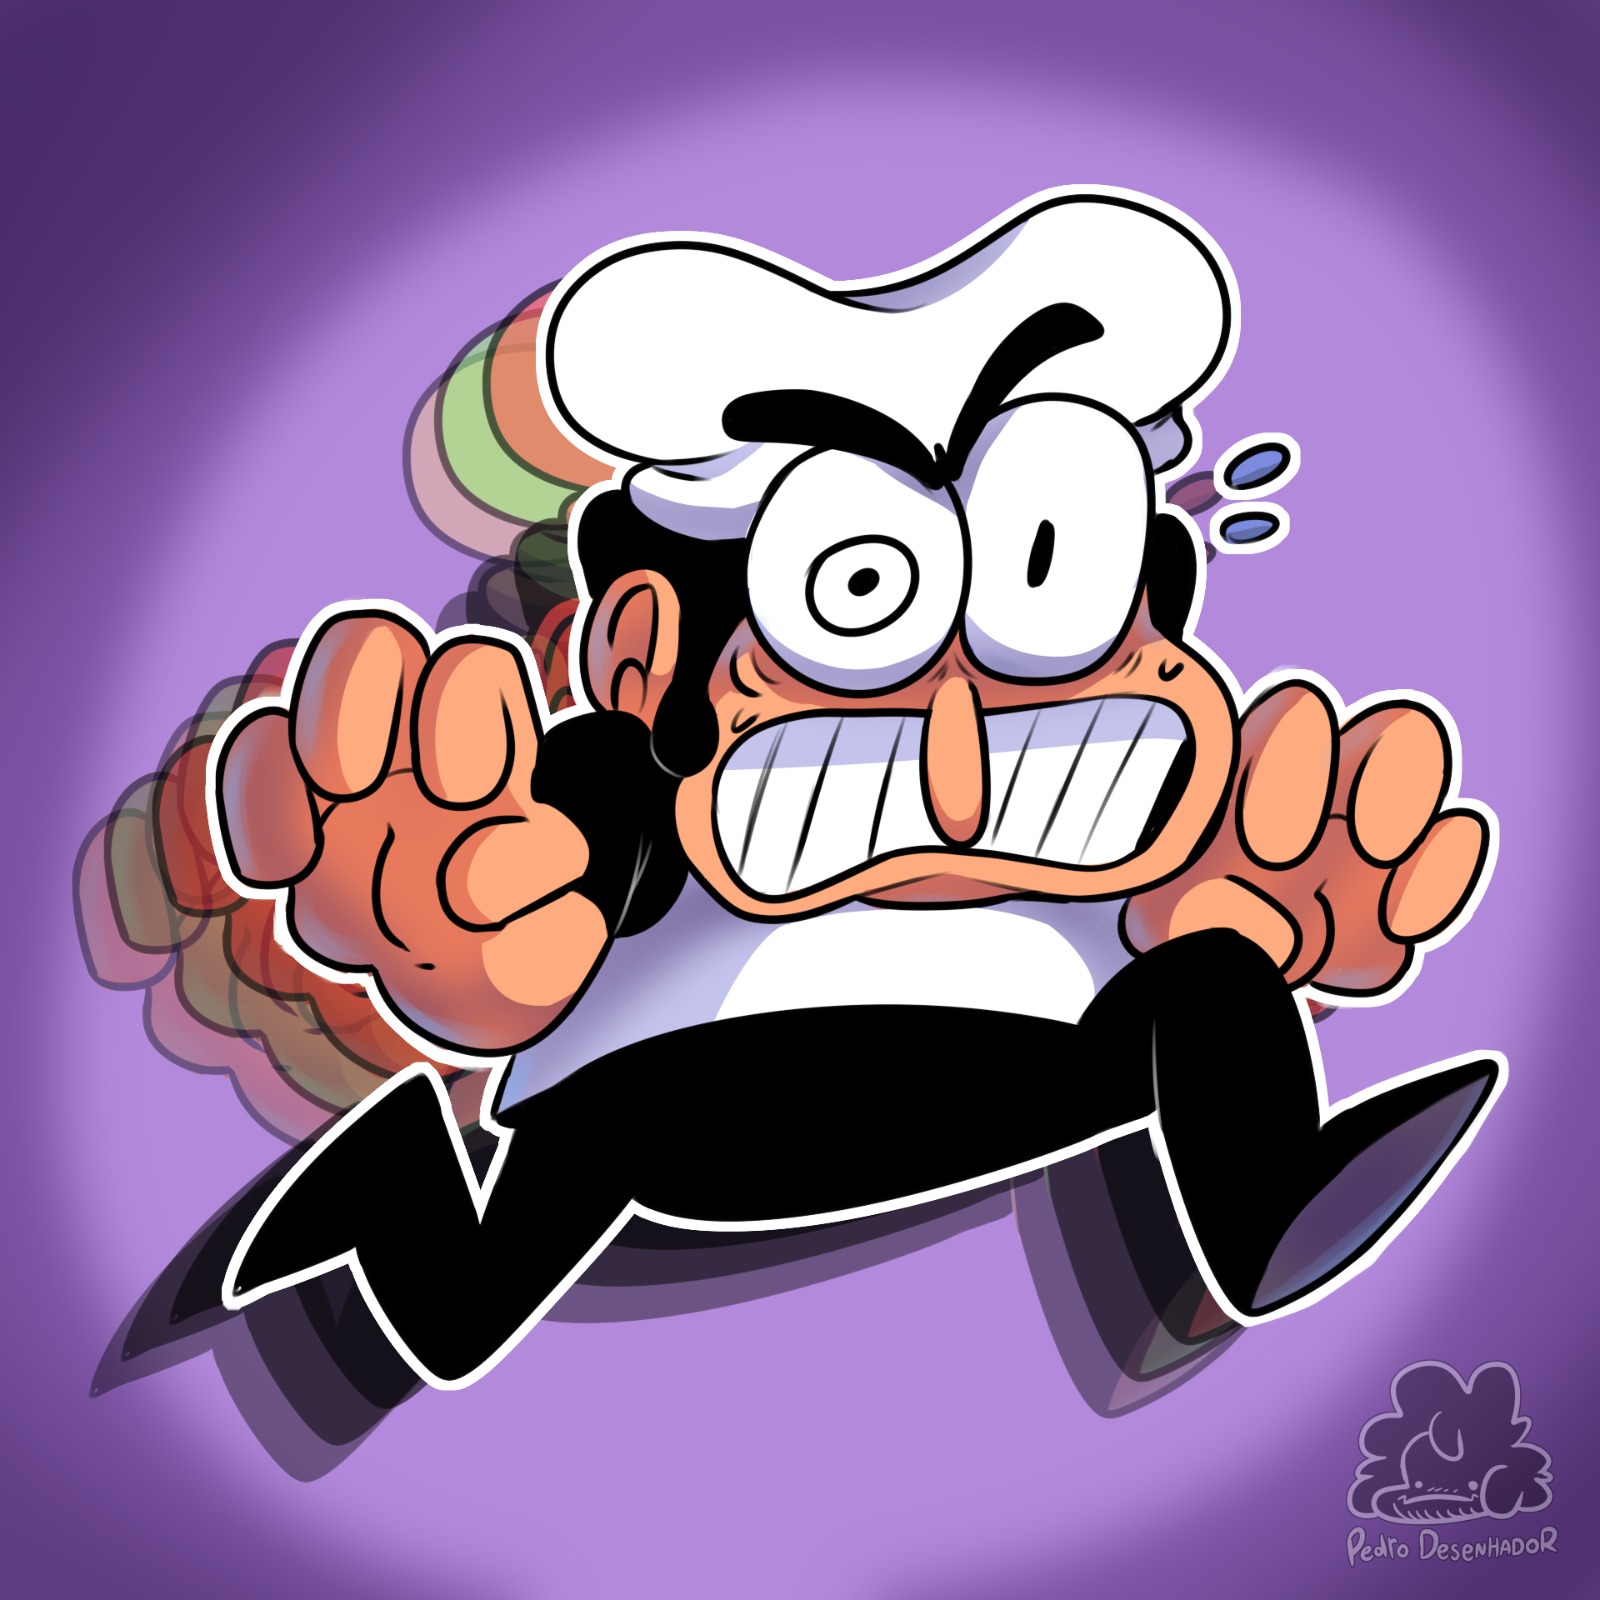 Peppino Angry Pose - Pizza Tower by CasualMarvelFan on DeviantArt